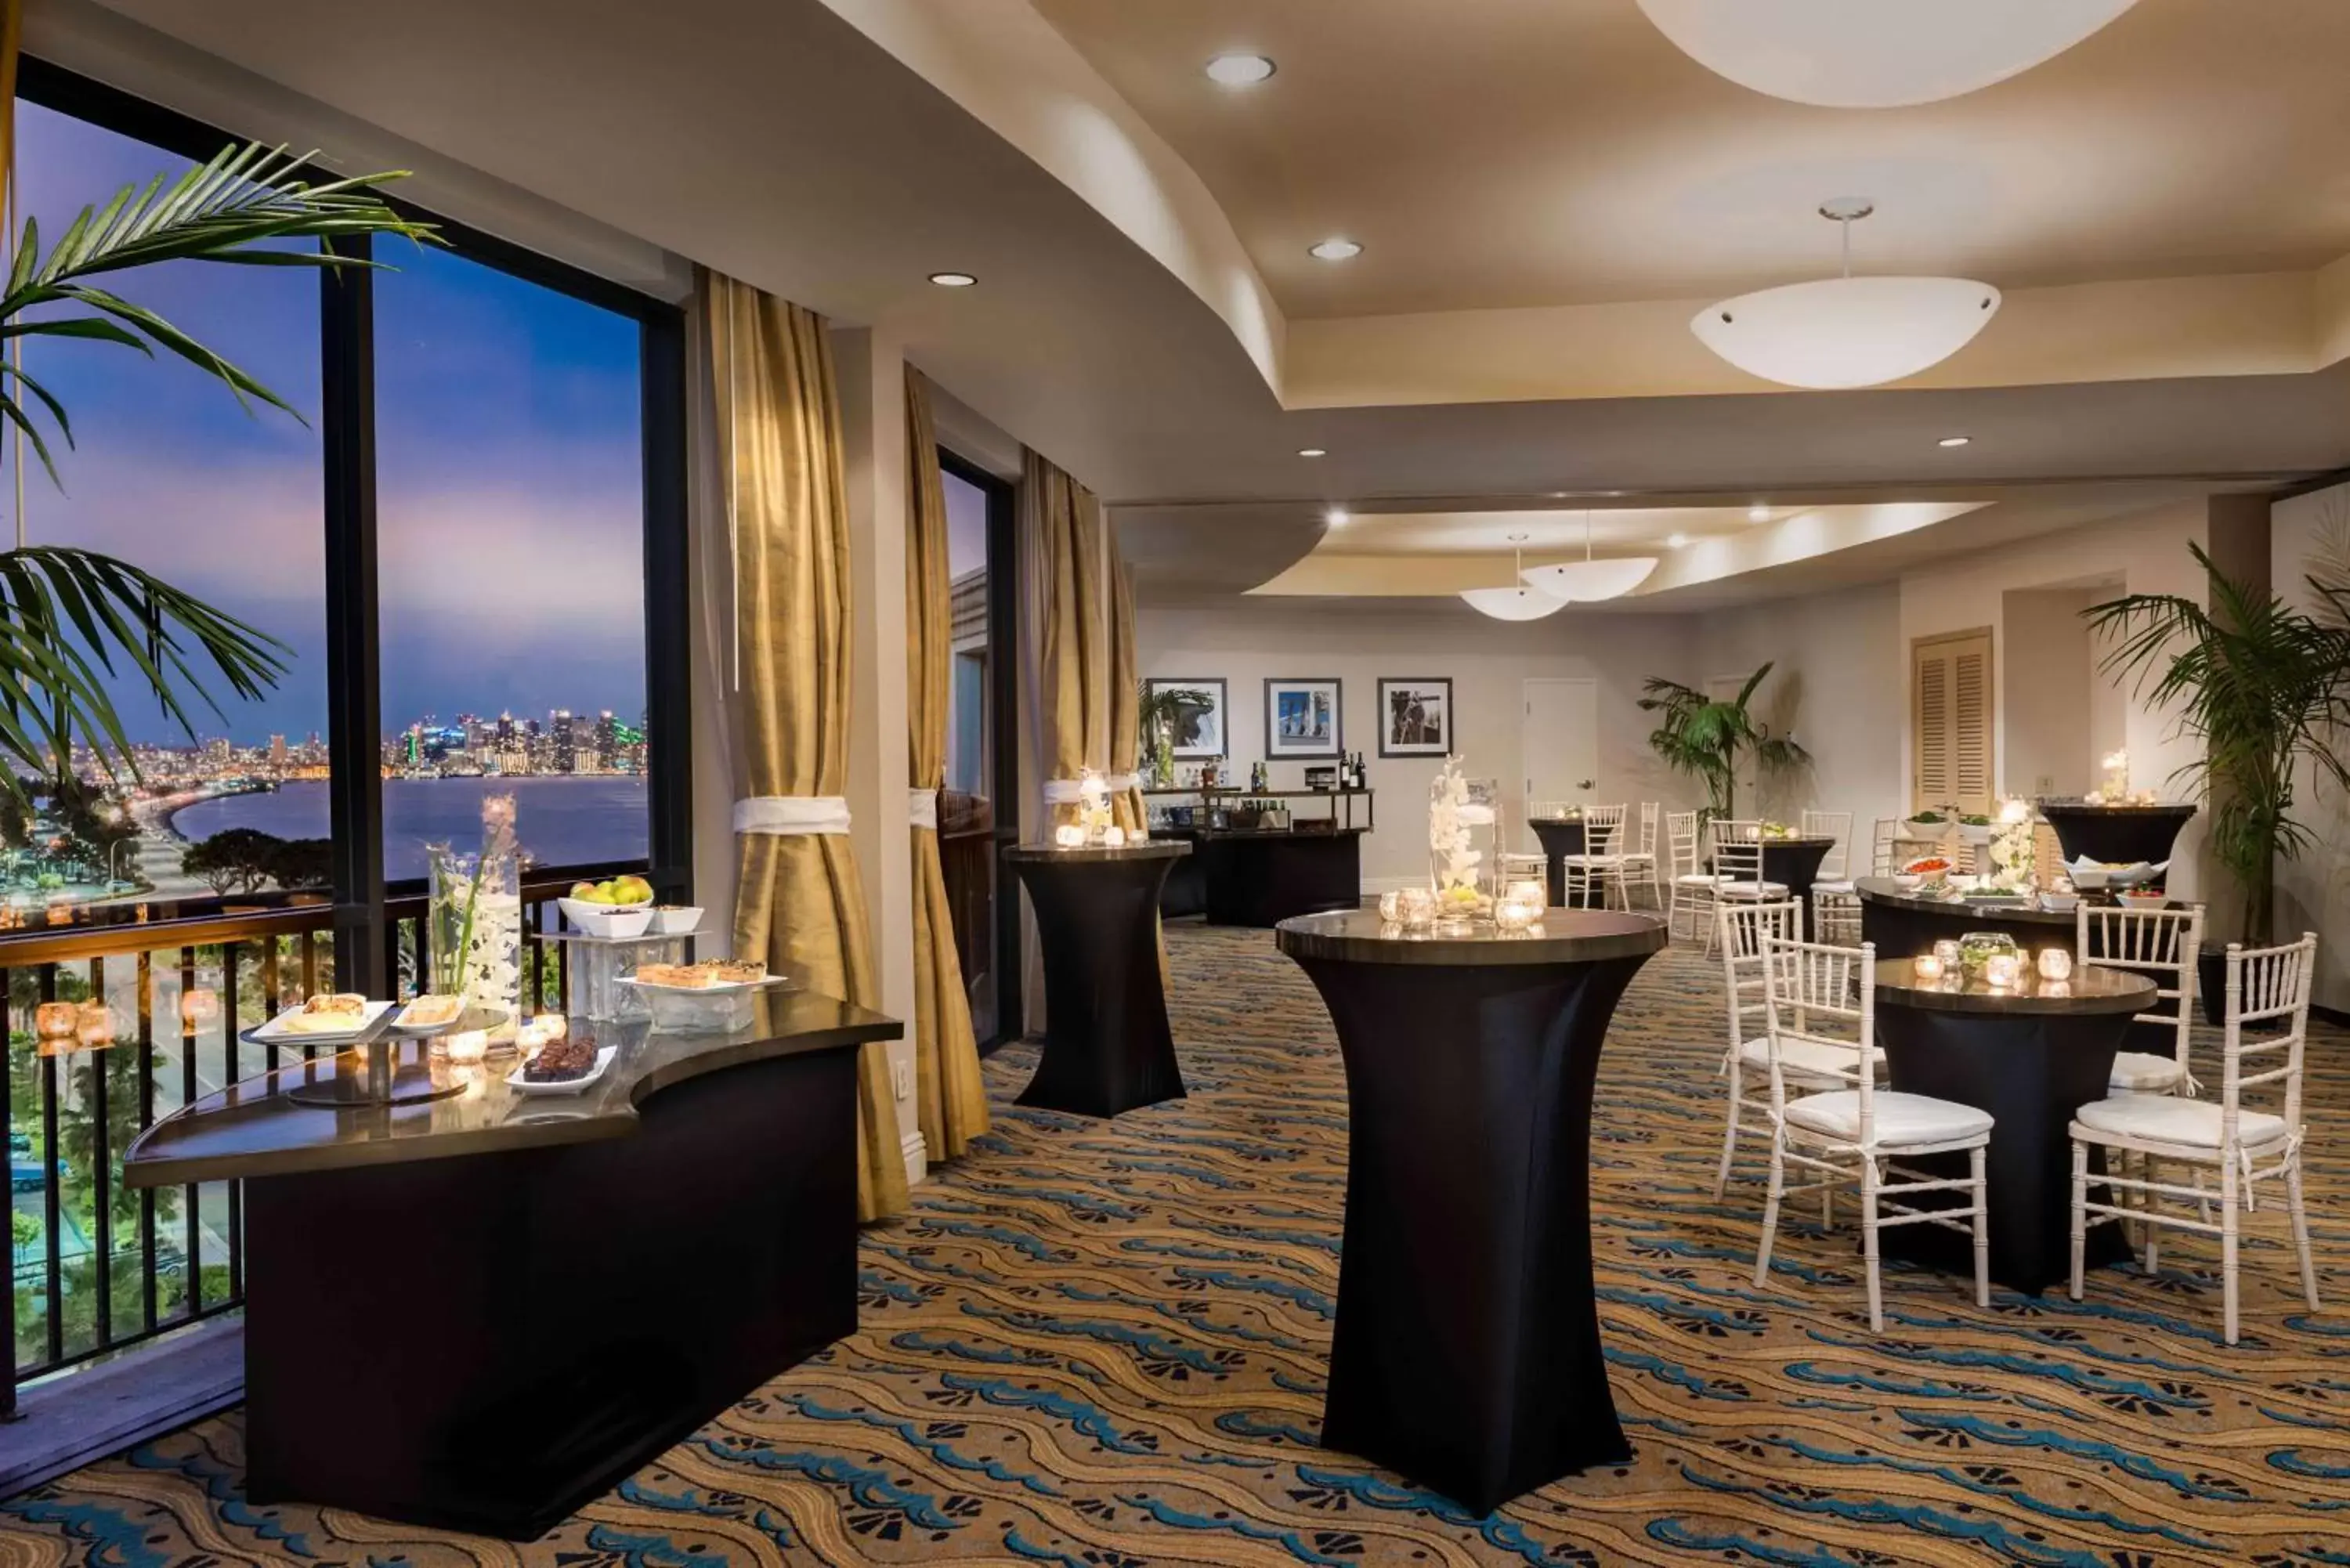 Meeting/conference room, Restaurant/Places to Eat in Hilton San Diego Airport/Harbor Island